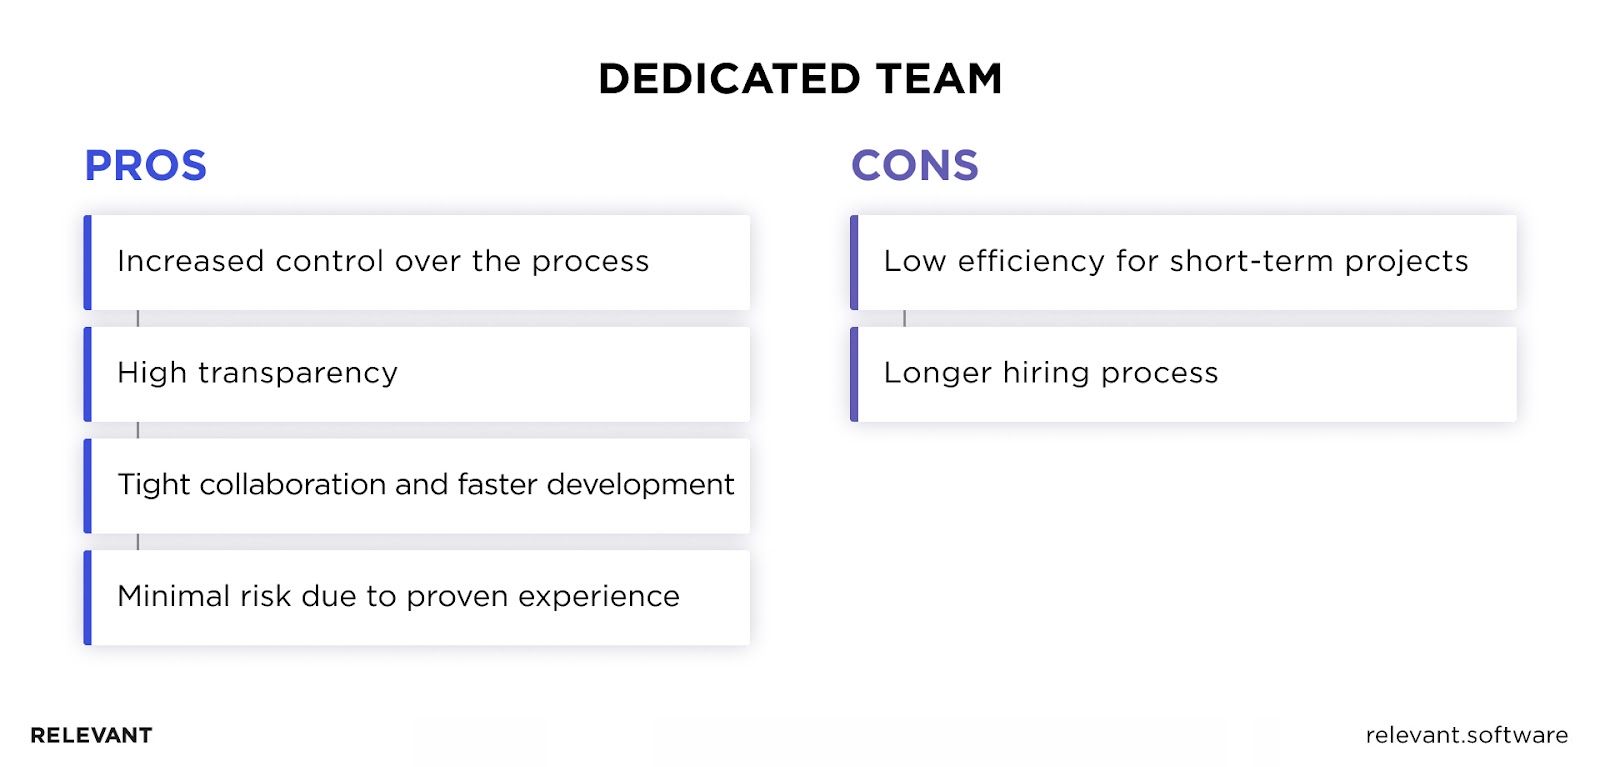 Dedicated Team pros and cons